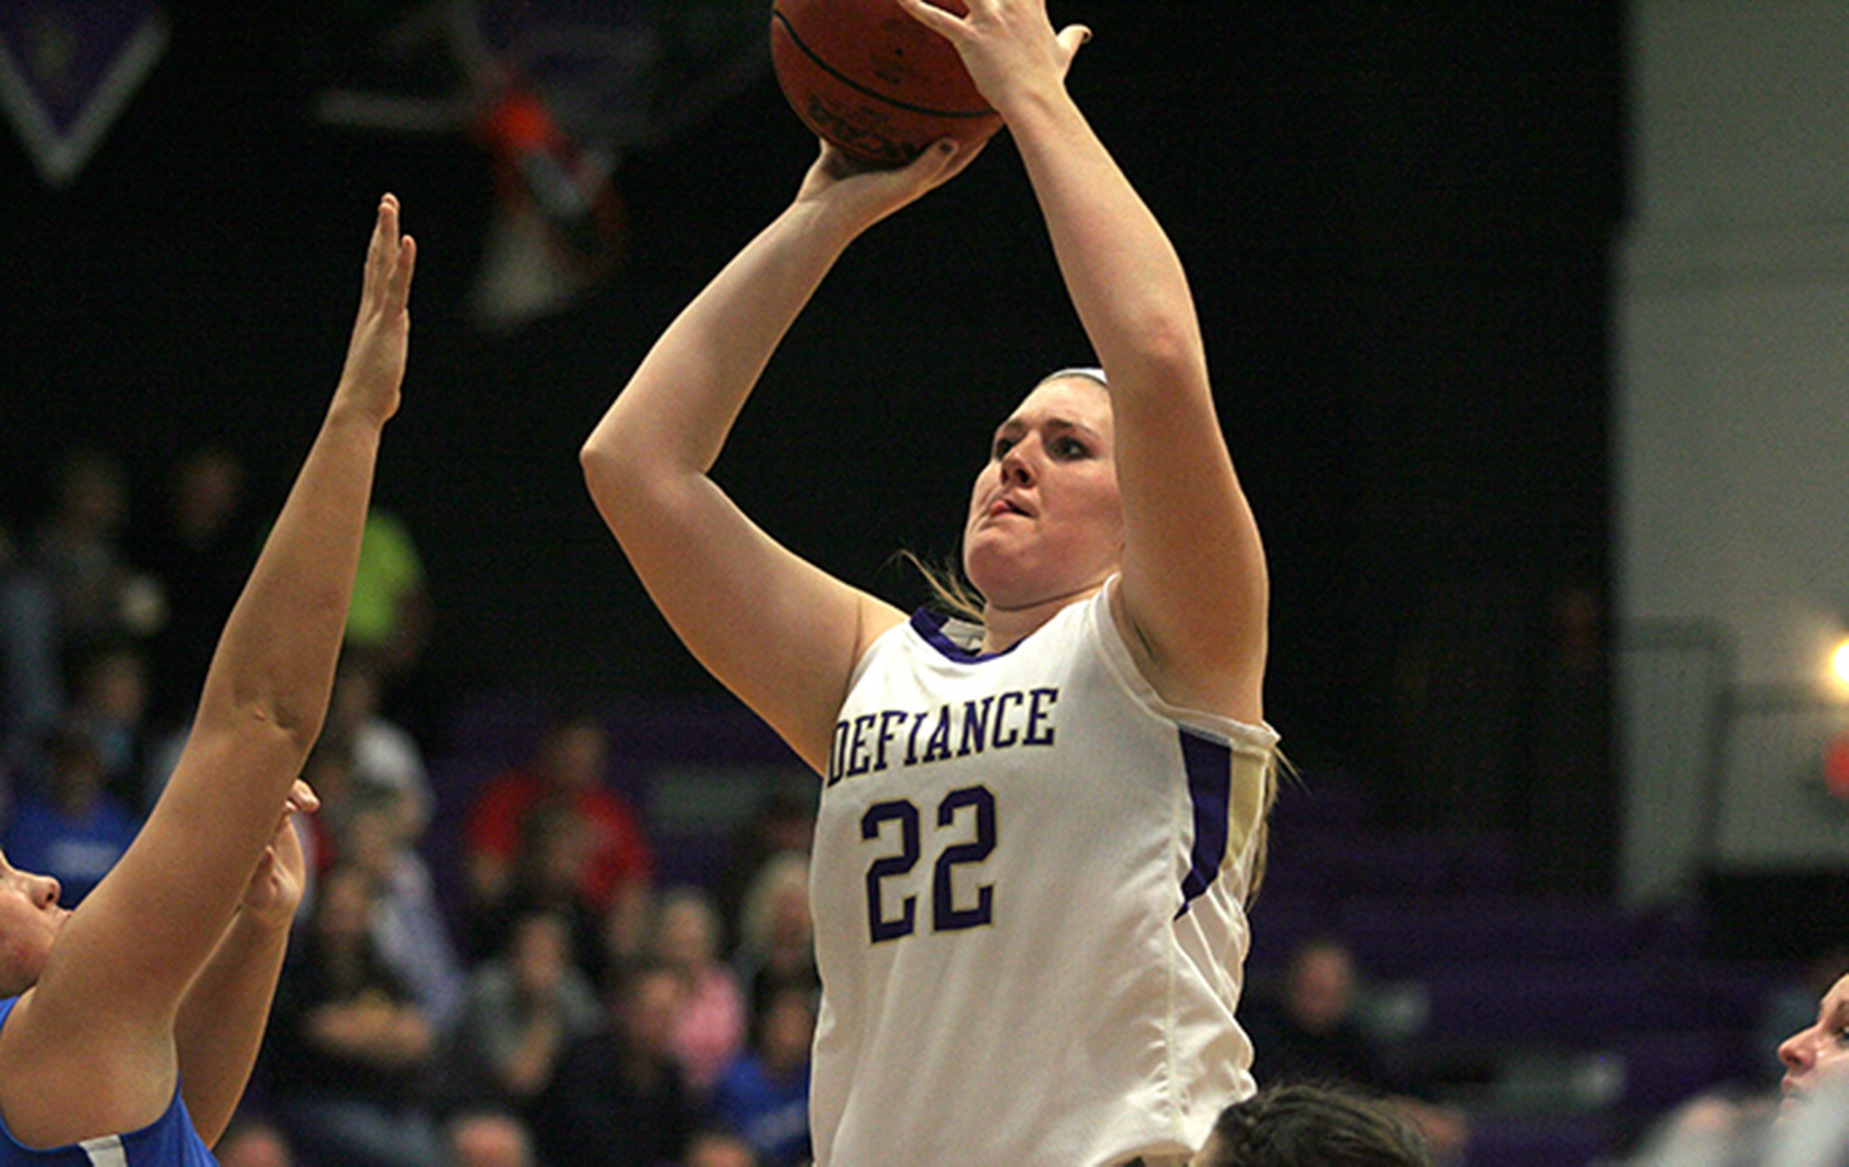 Tietje Joins 1,000-Point Club in Loss to Mount Union